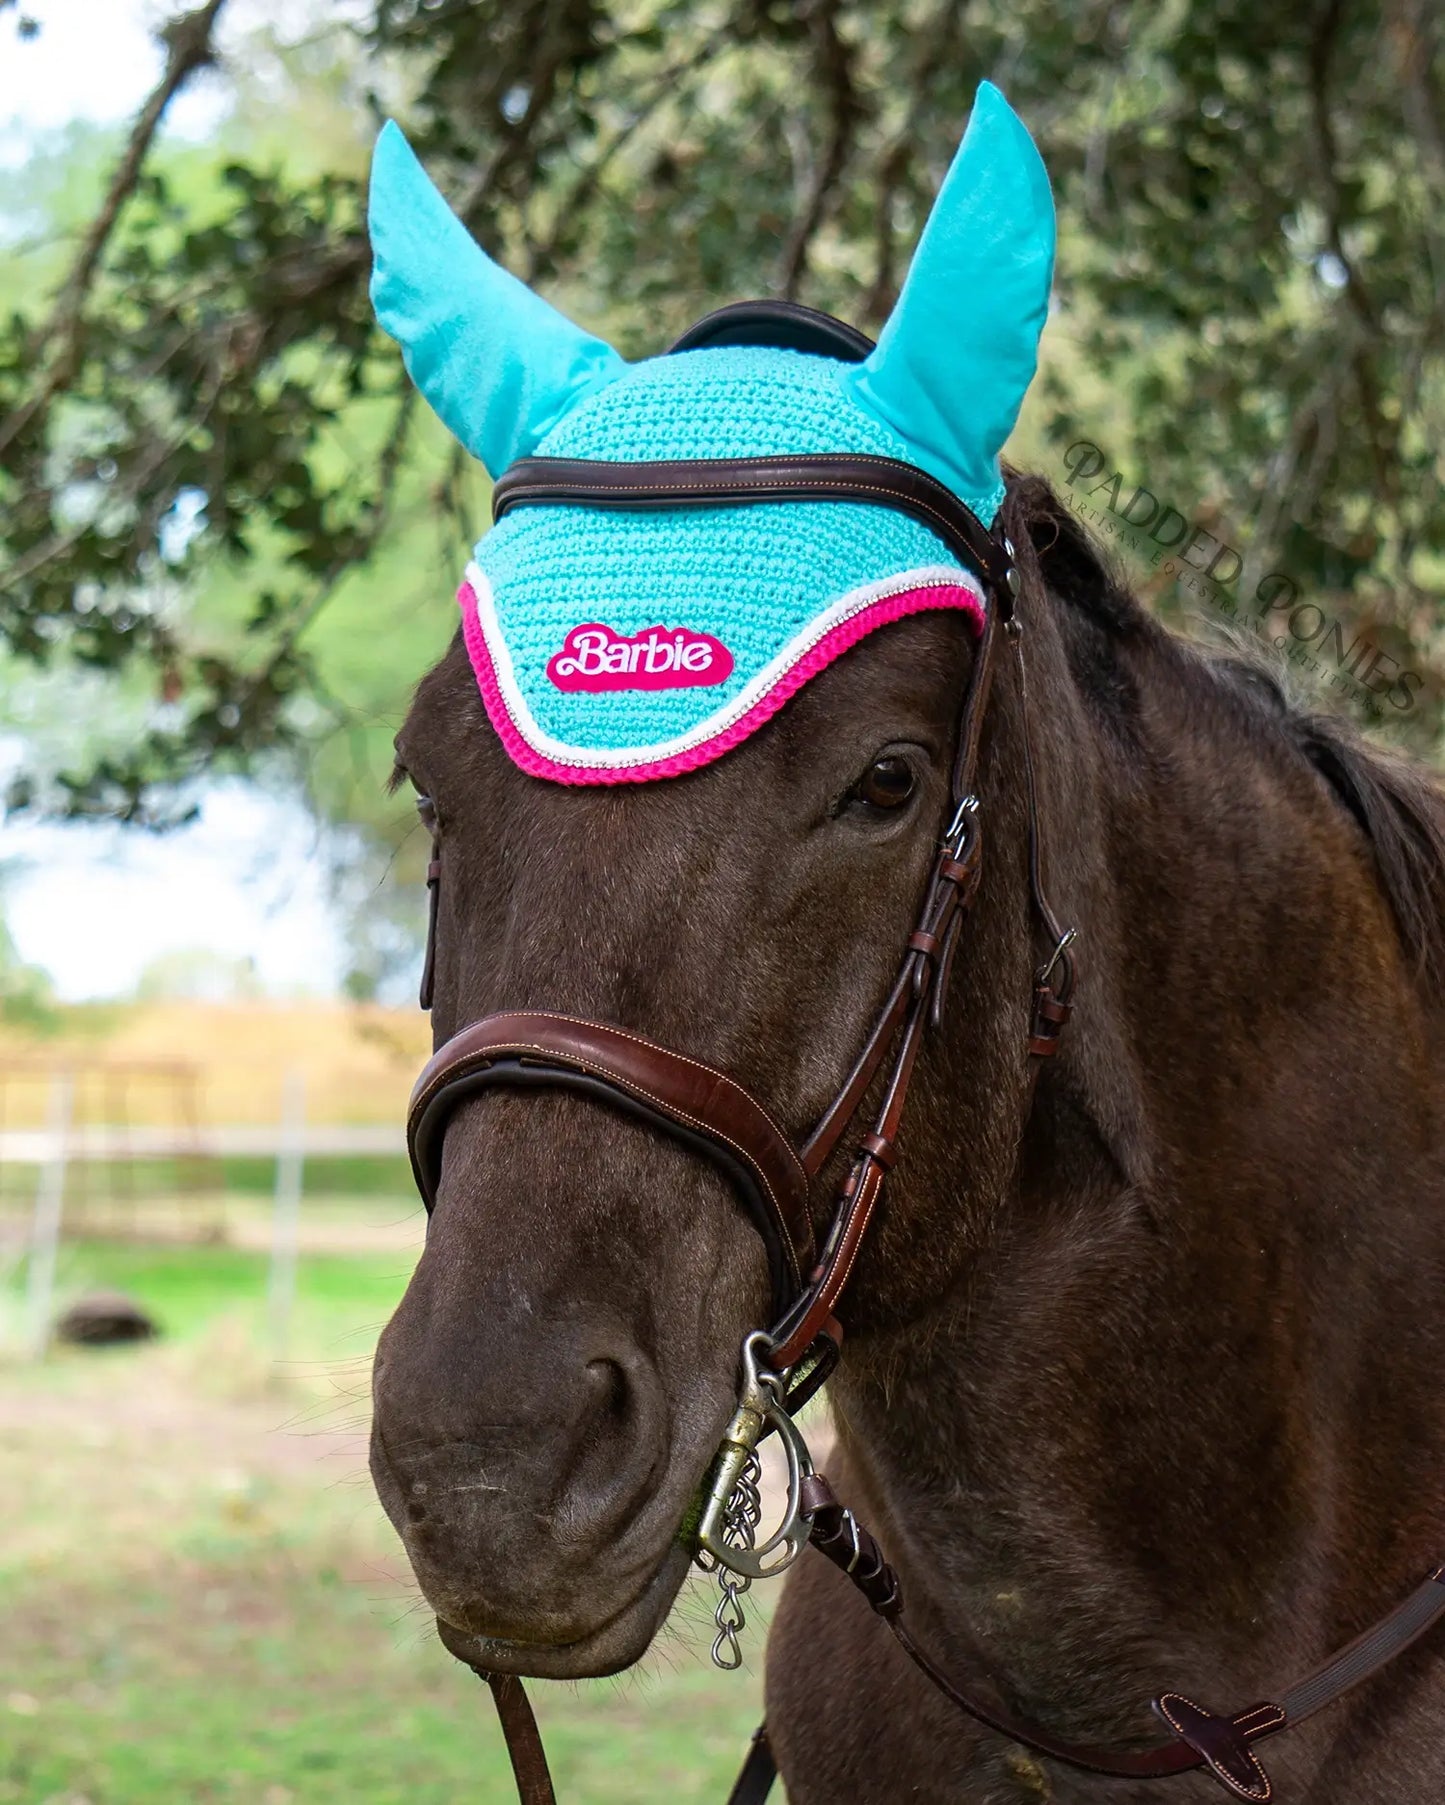 Aqua Blue and Hot Pink Barbie Patch Fly Veil Bonnet with Rhinestones